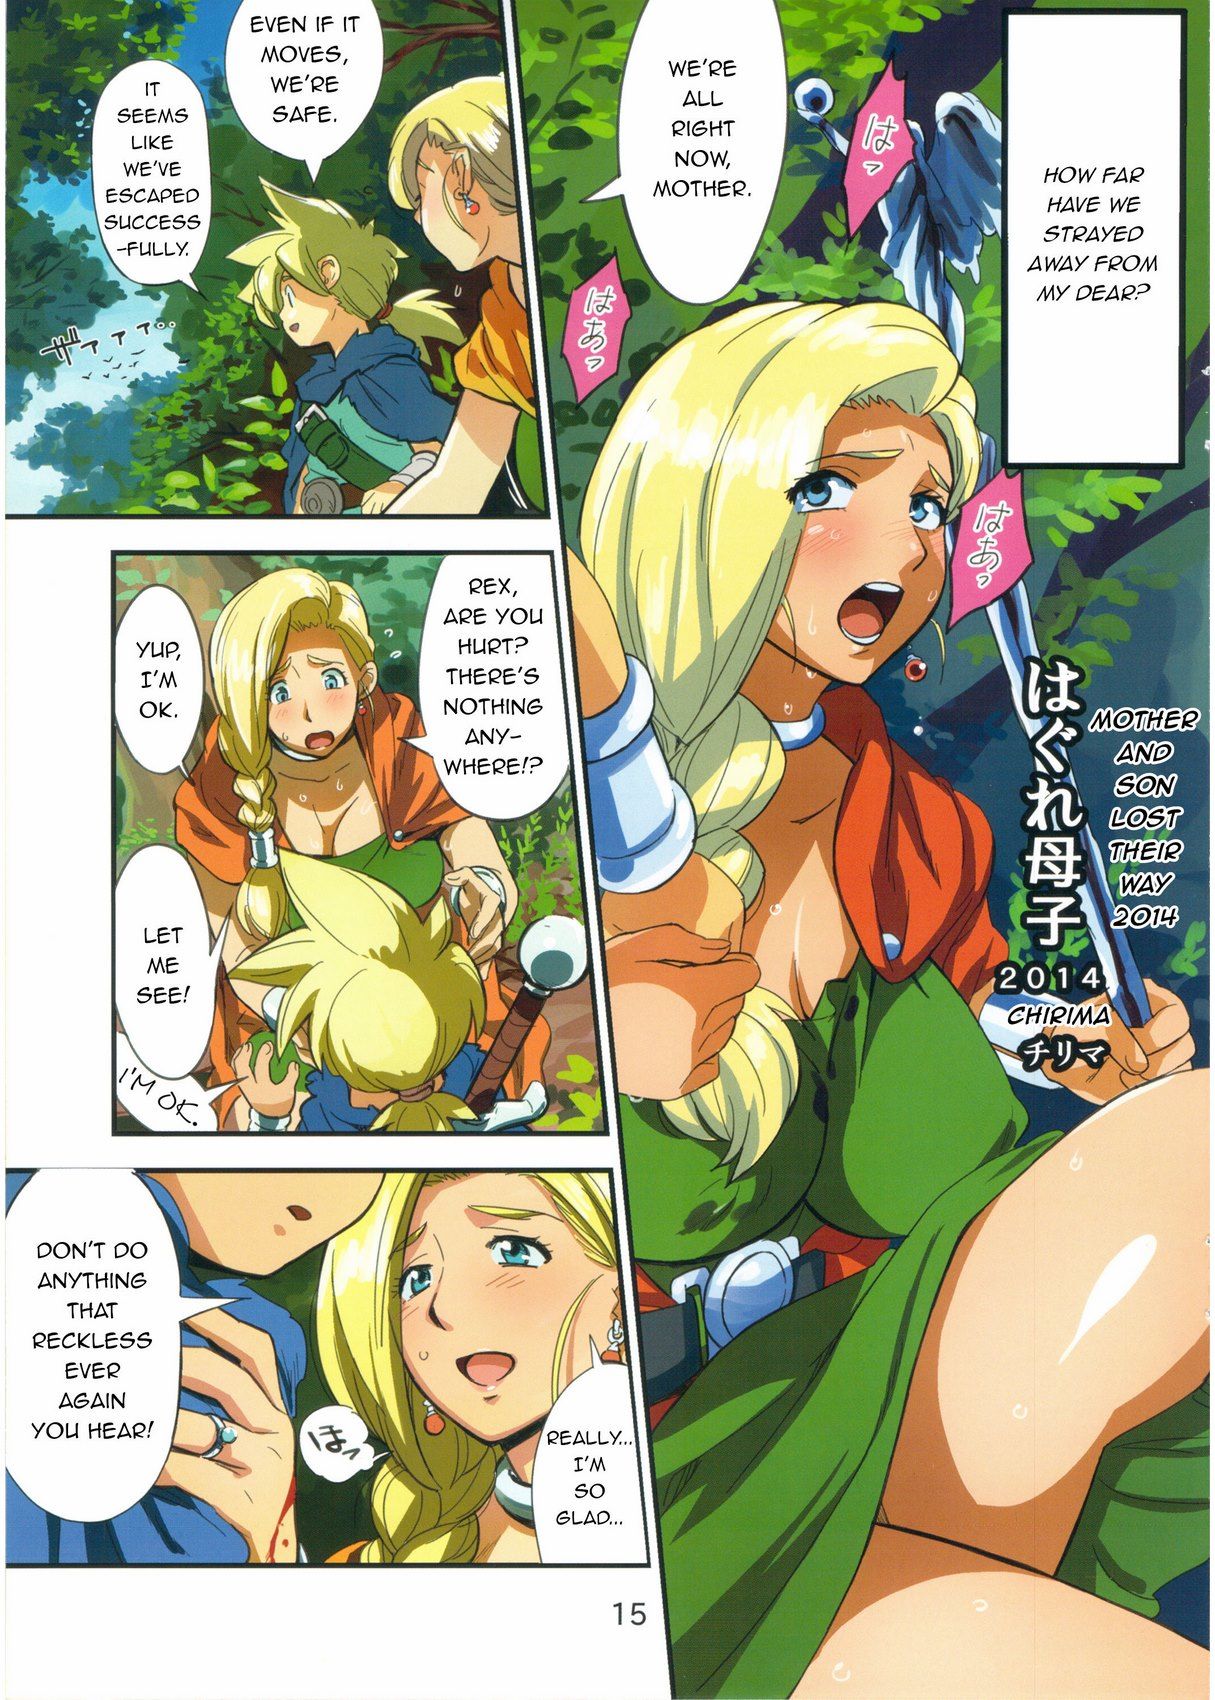 Mother and Son Lose Their Way by chirimaya (Dragon Quest V) page 1